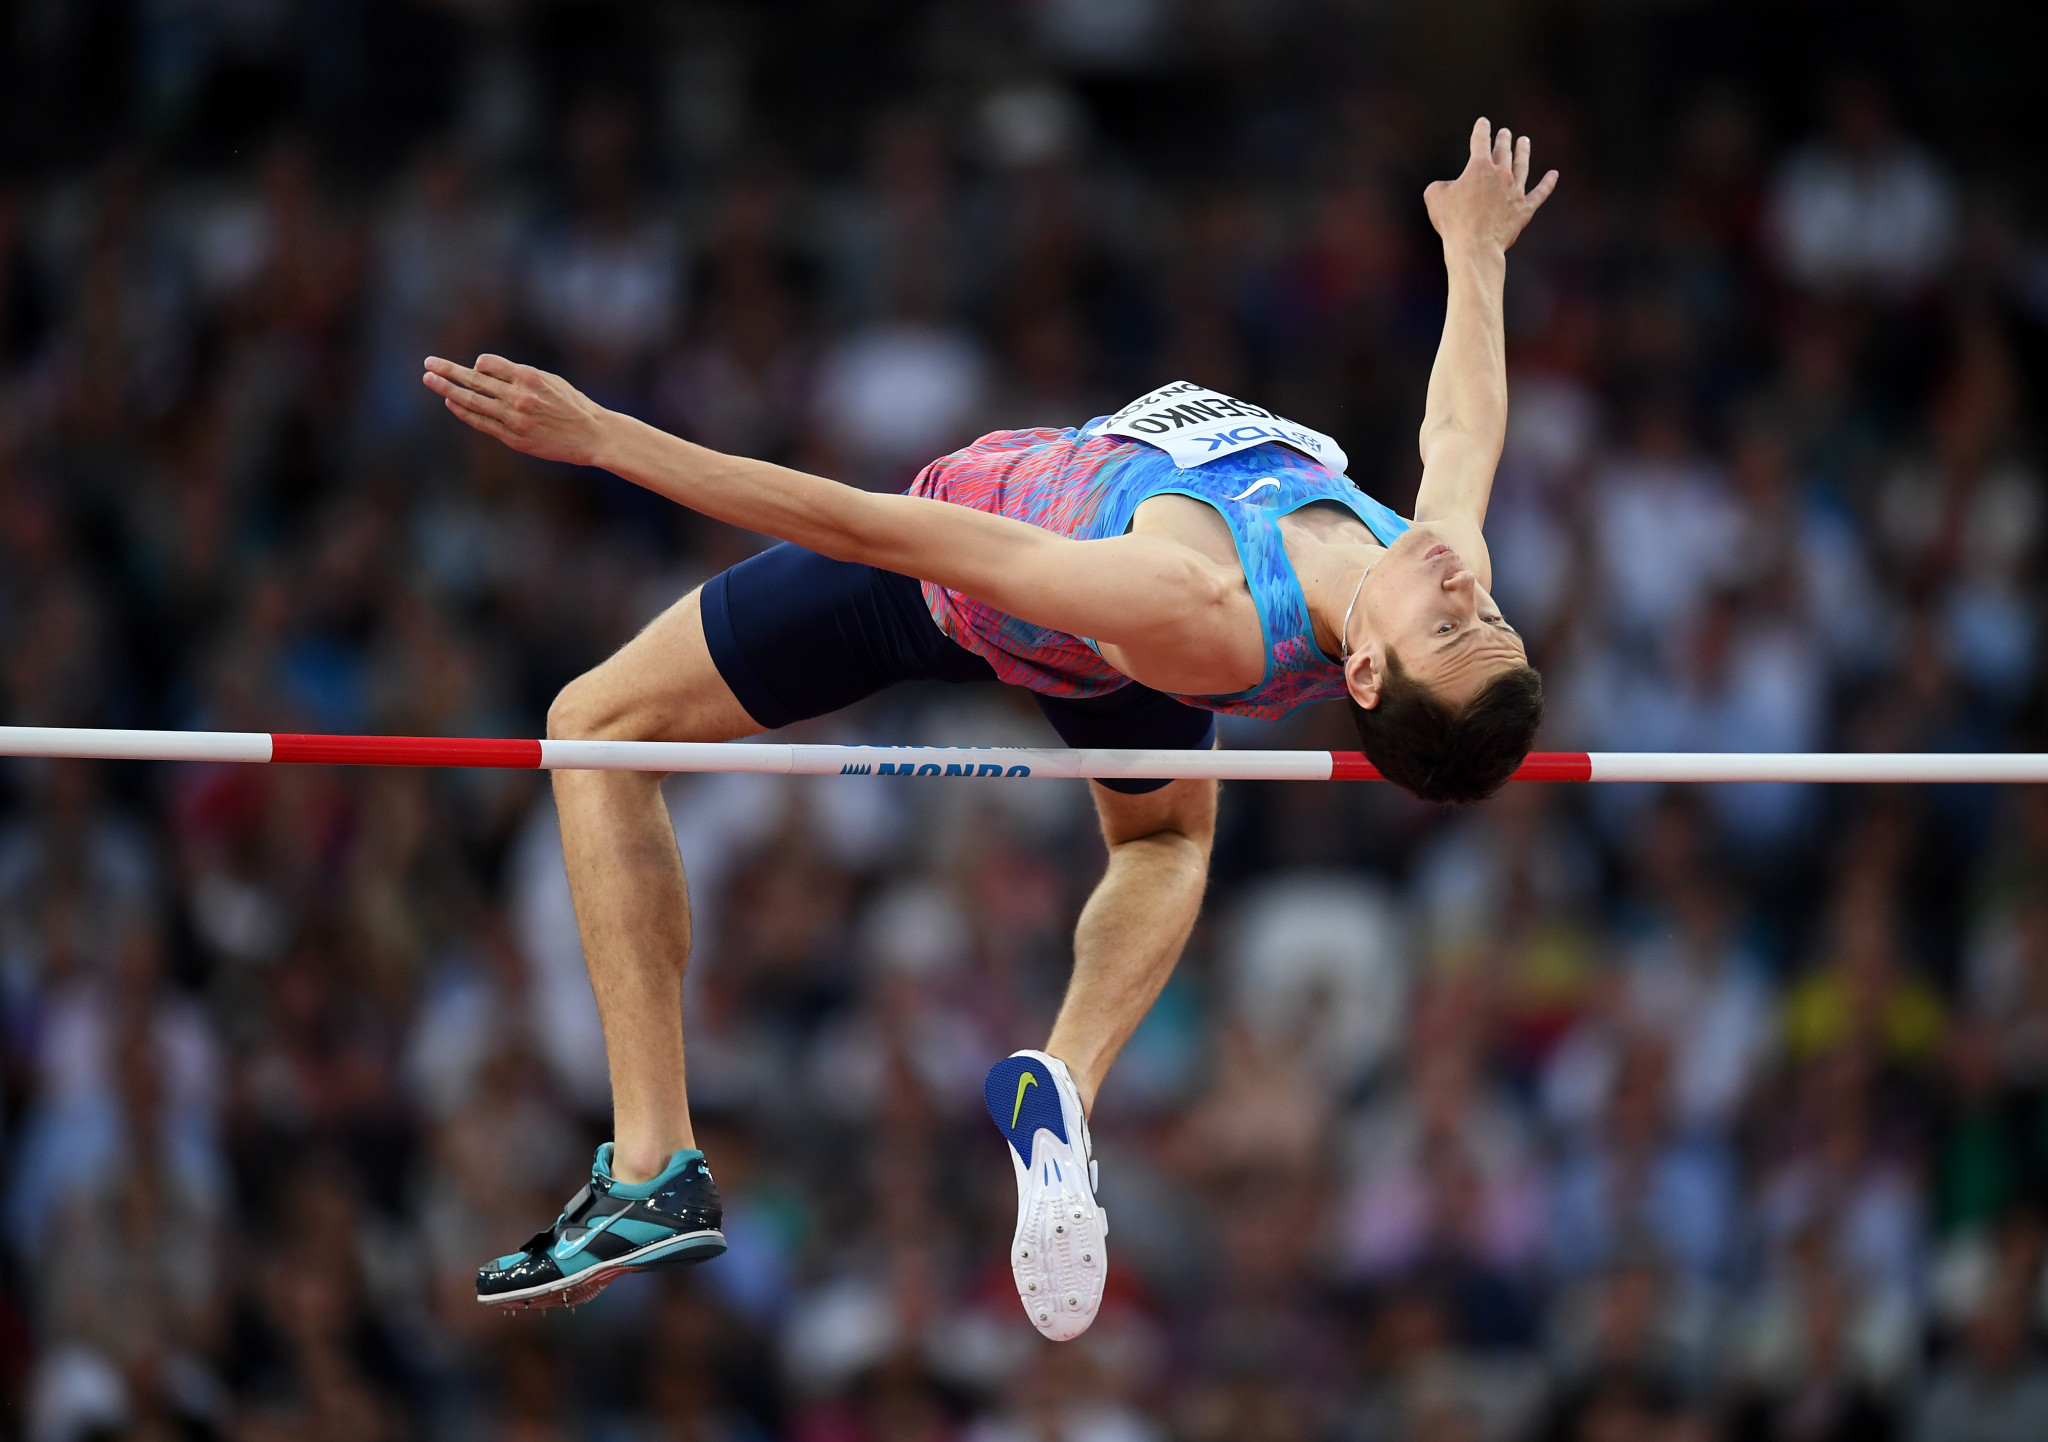 The Russian Athletics Federation has been given a deadline of February 10 by World Athletics to explain the full circumstances surrounding missed tests by high jumper Danil Lysenko ©Getty Images